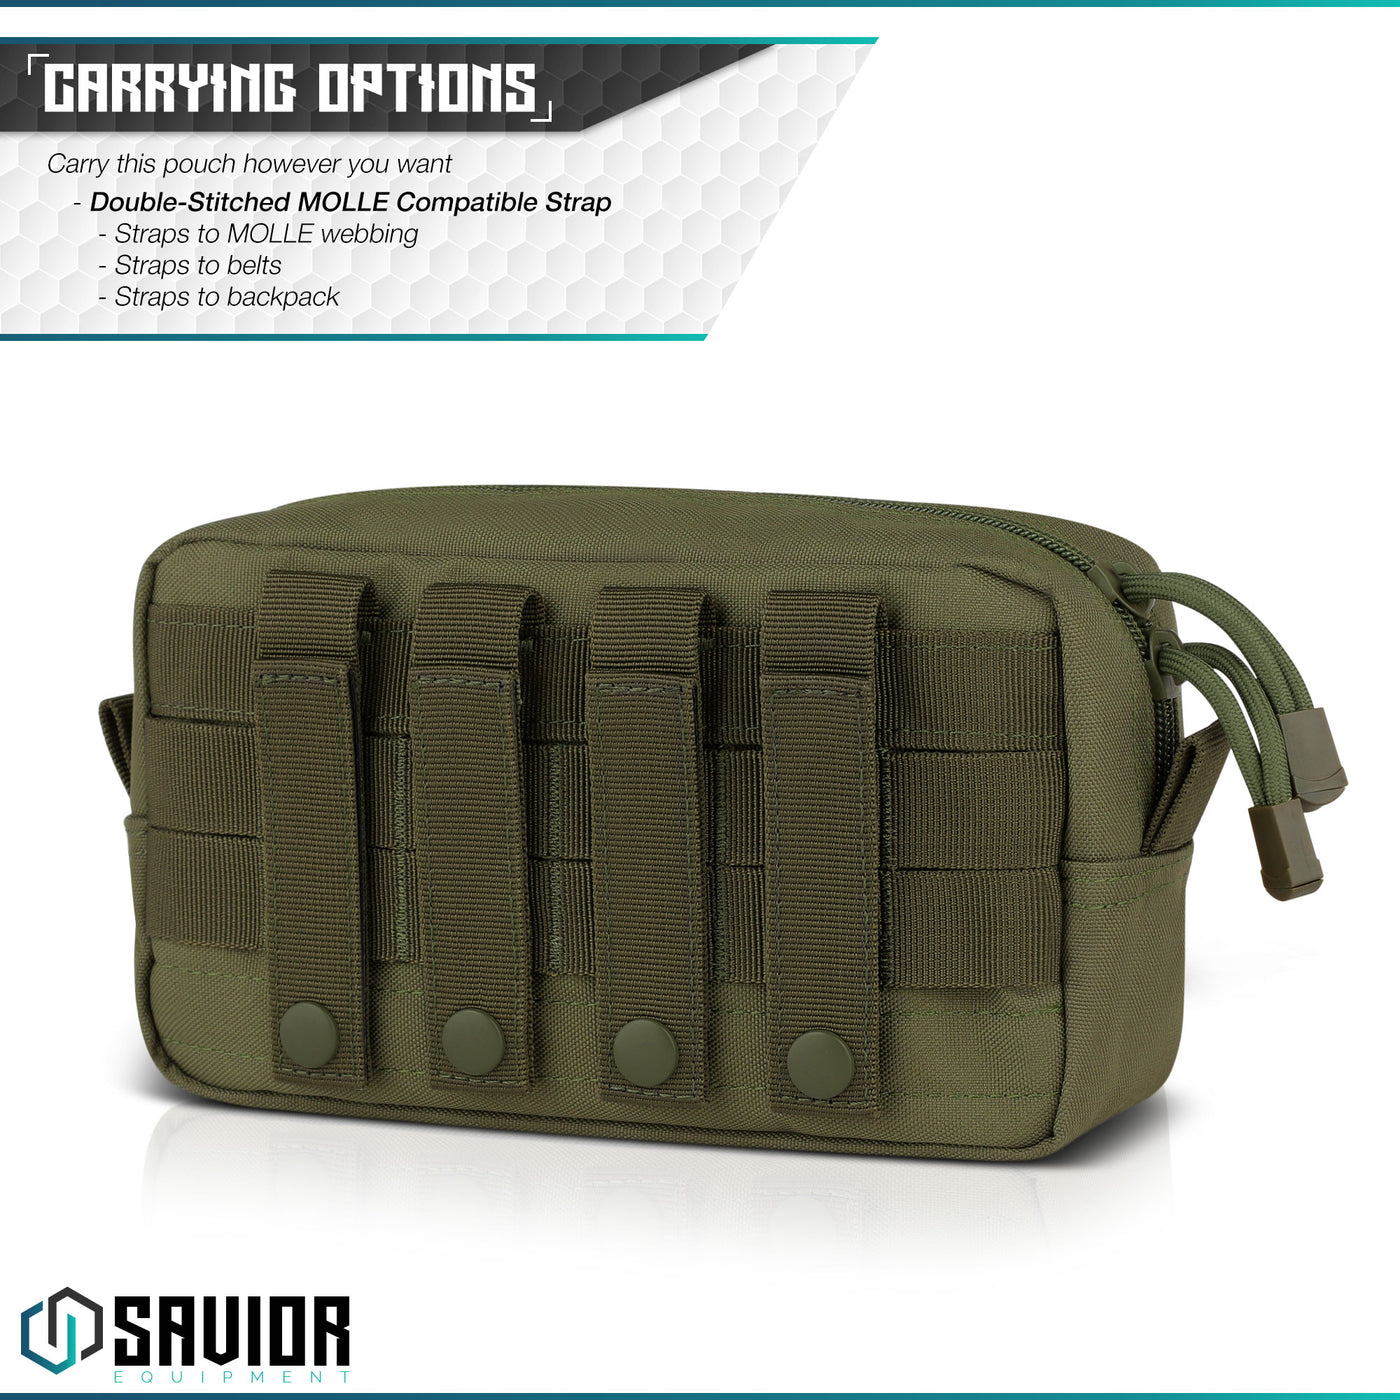 Multiple Carrying Options - Carry this pouch however you want. Double-Stitched MOLLE compatible strap.Straps to MOLLE webbing. Straps to belts. Straps to backpack.